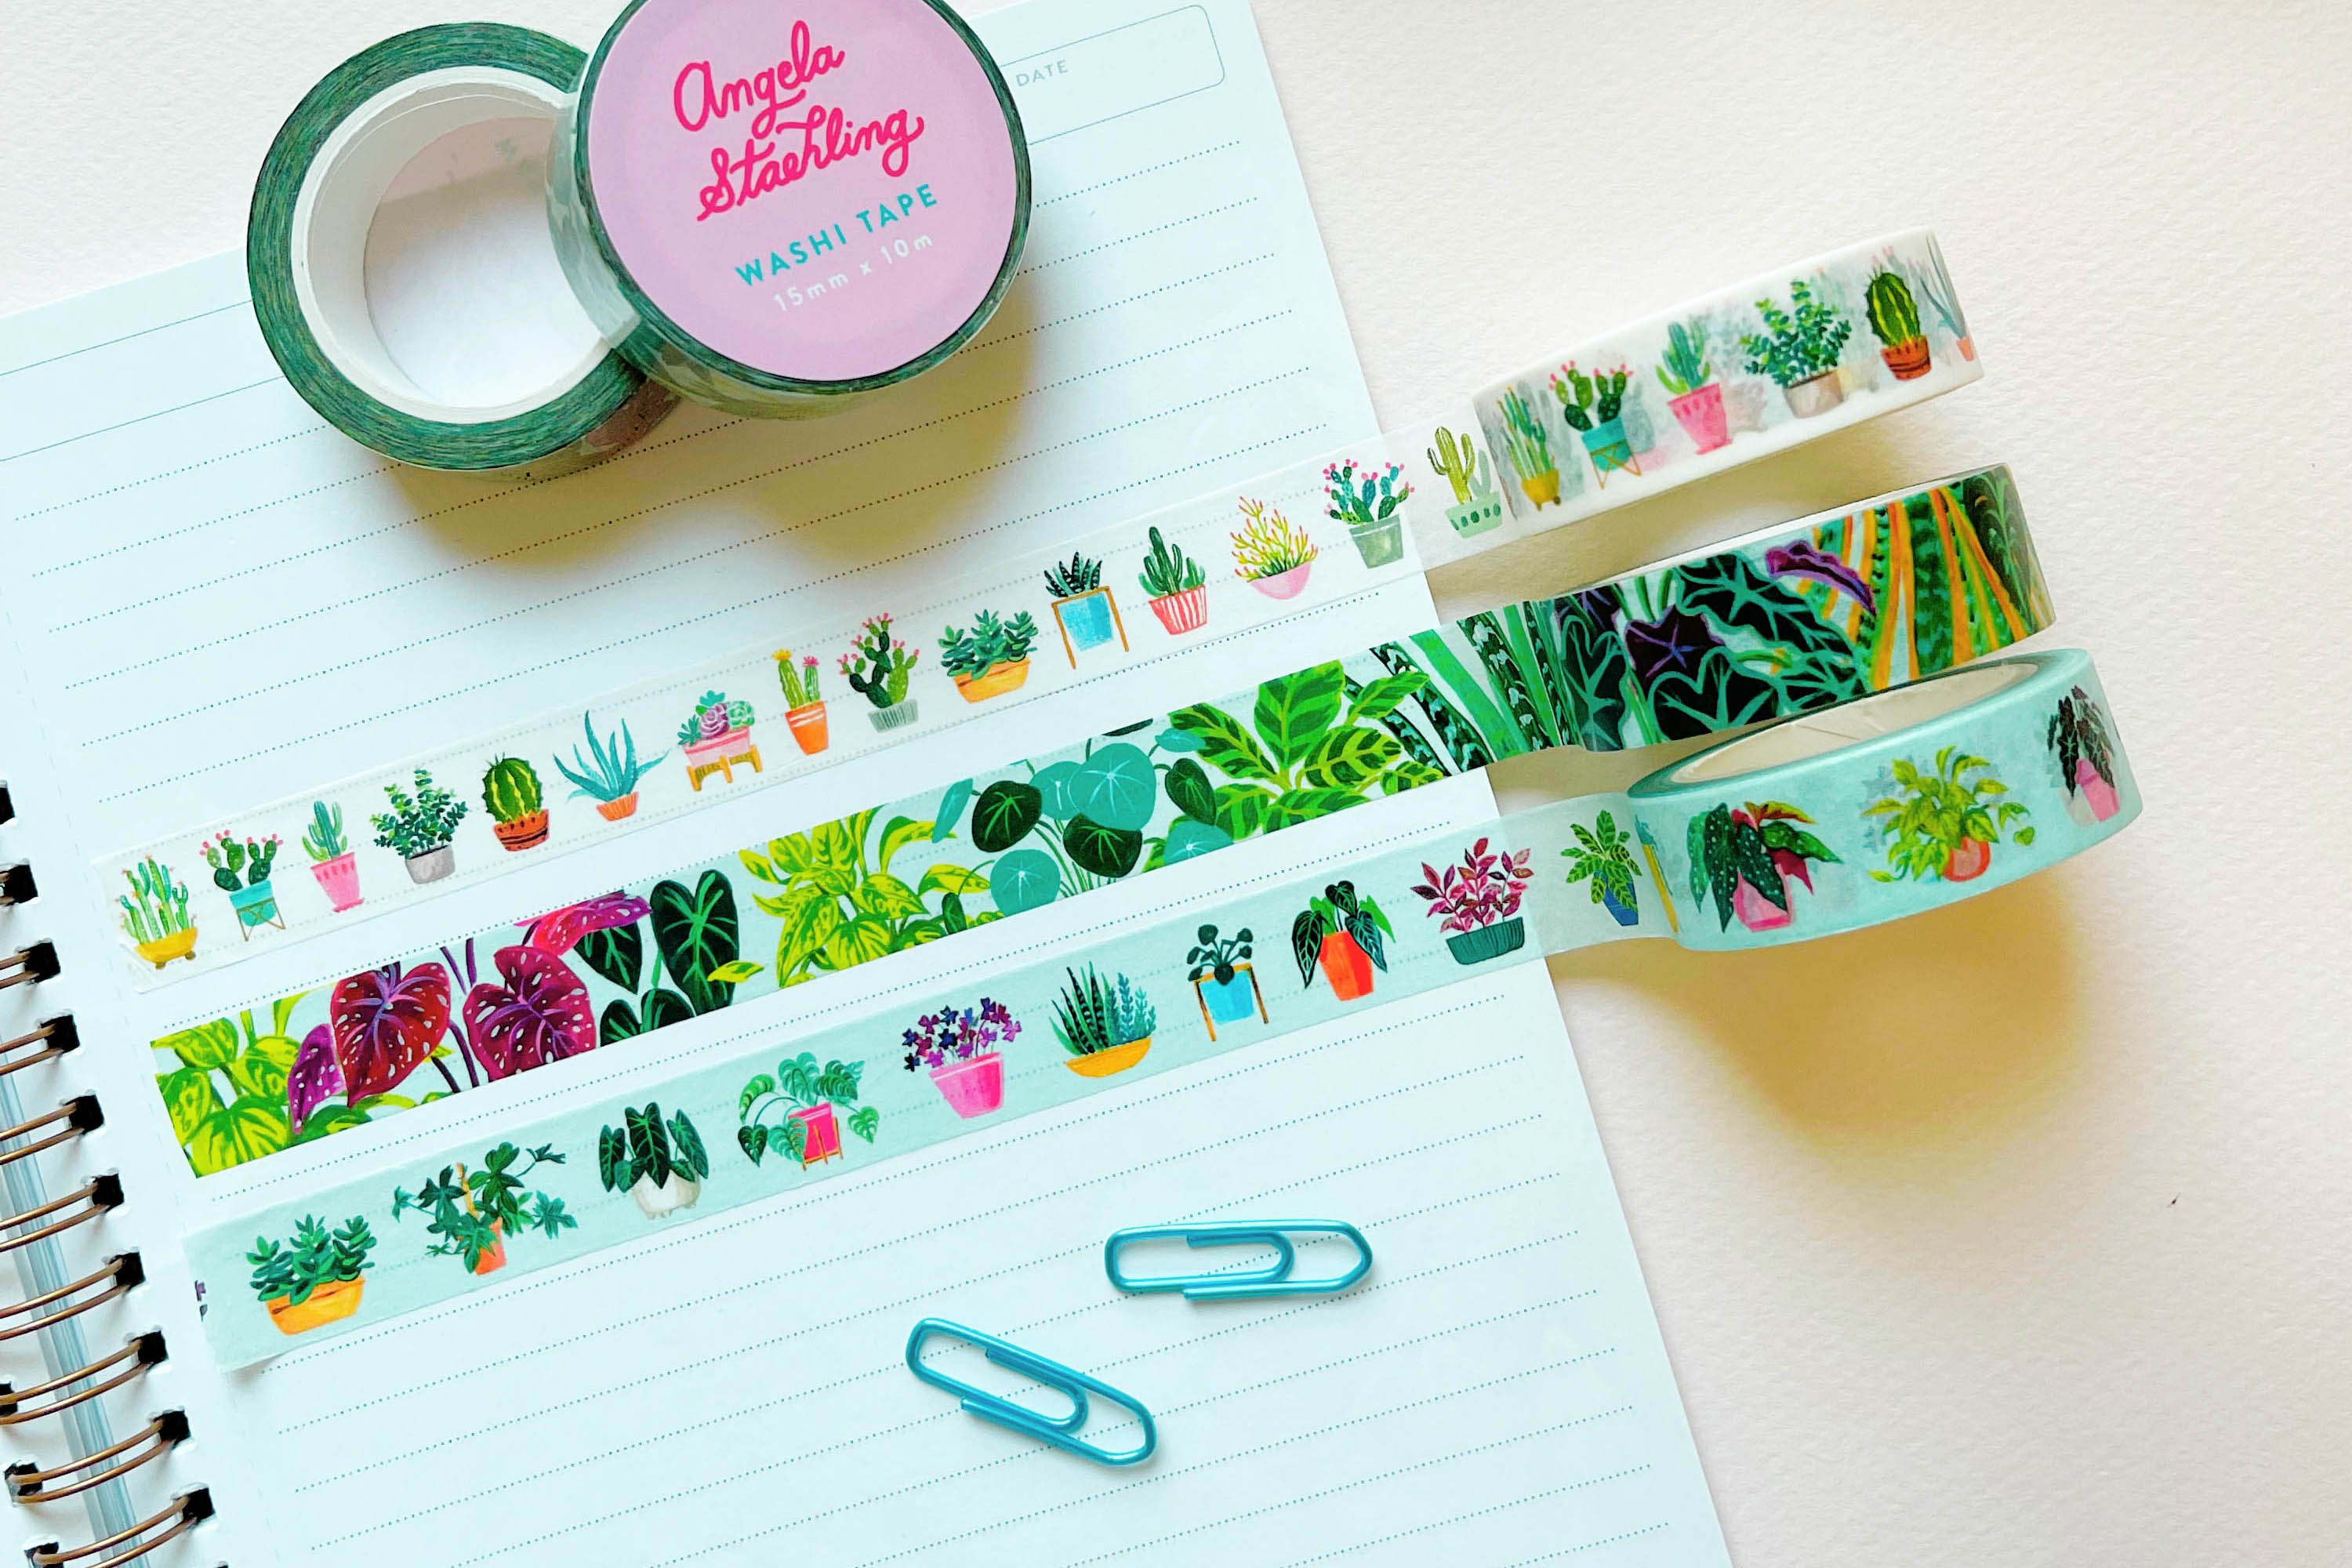 What's All the Buzz About “Washi Tape”? – Angela Staehling